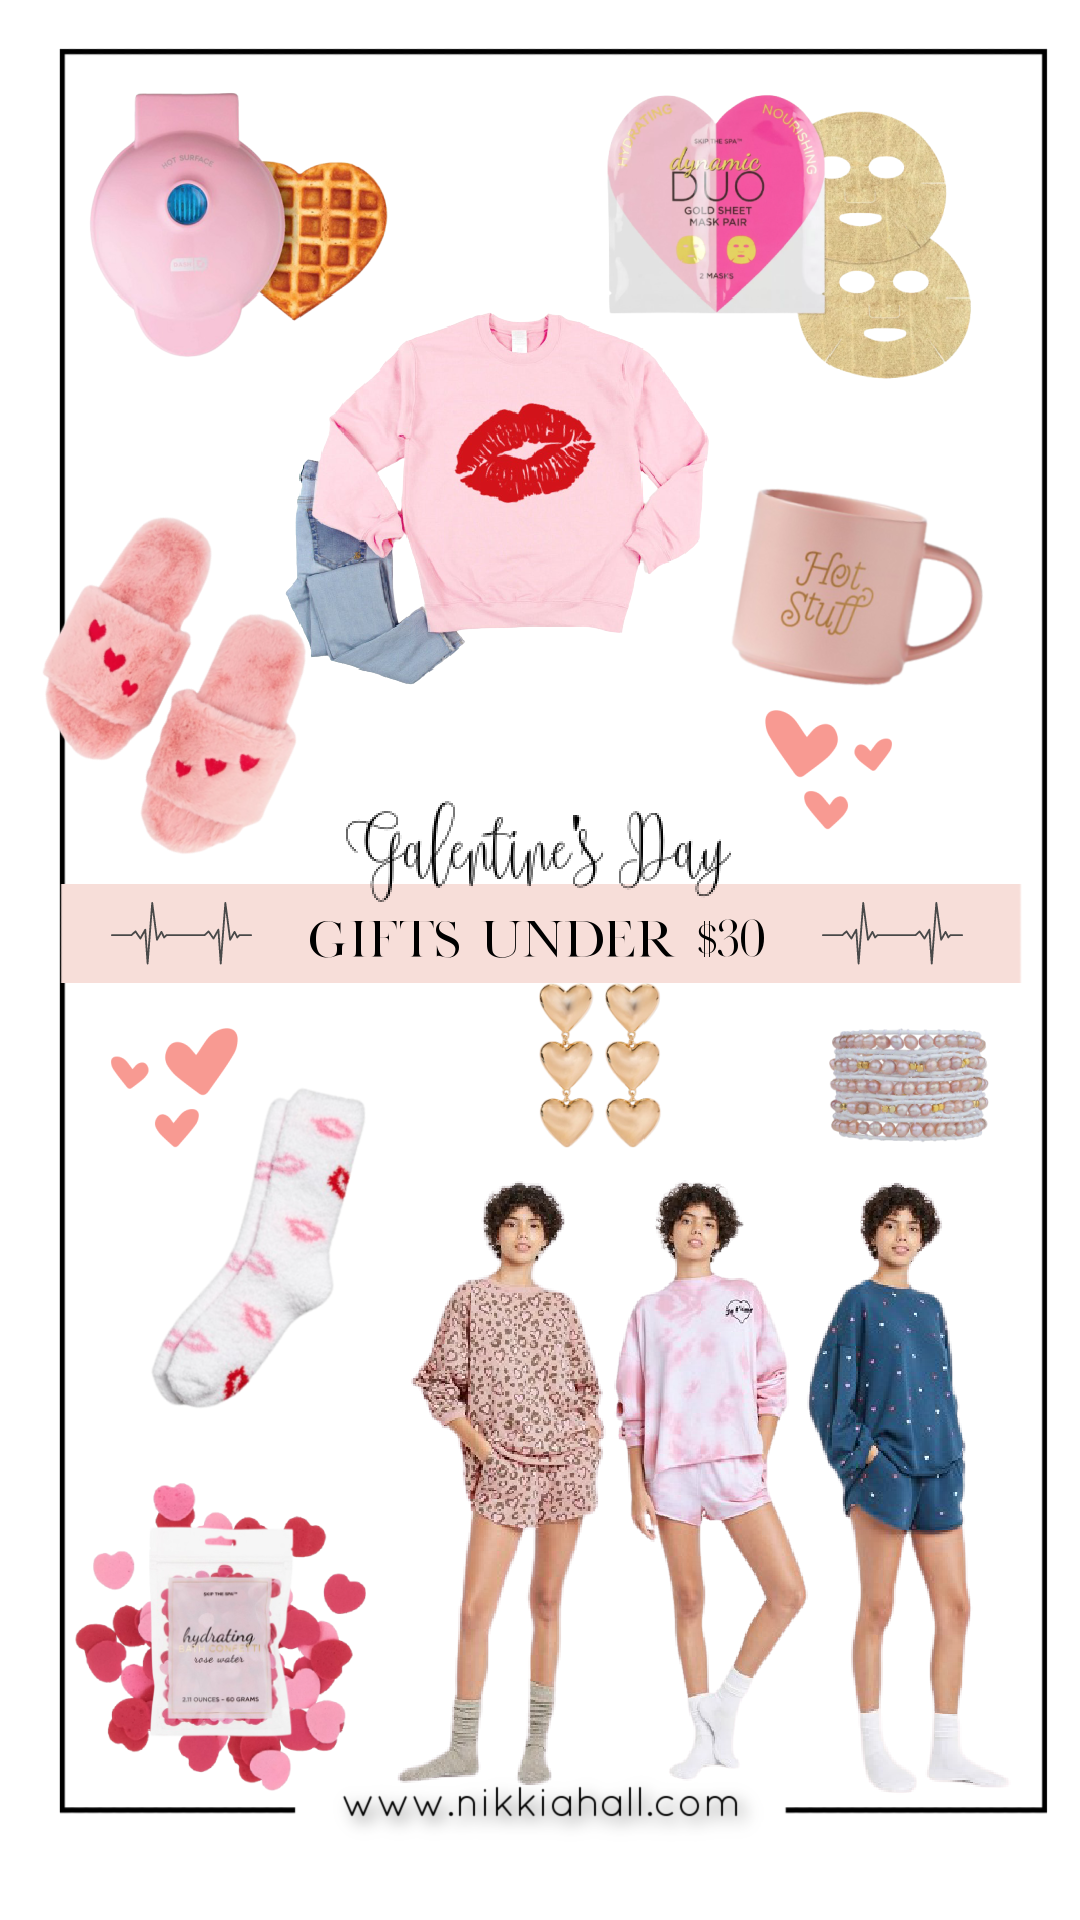 GALENTINE'S GIFTS FOR YOUR BESTIE